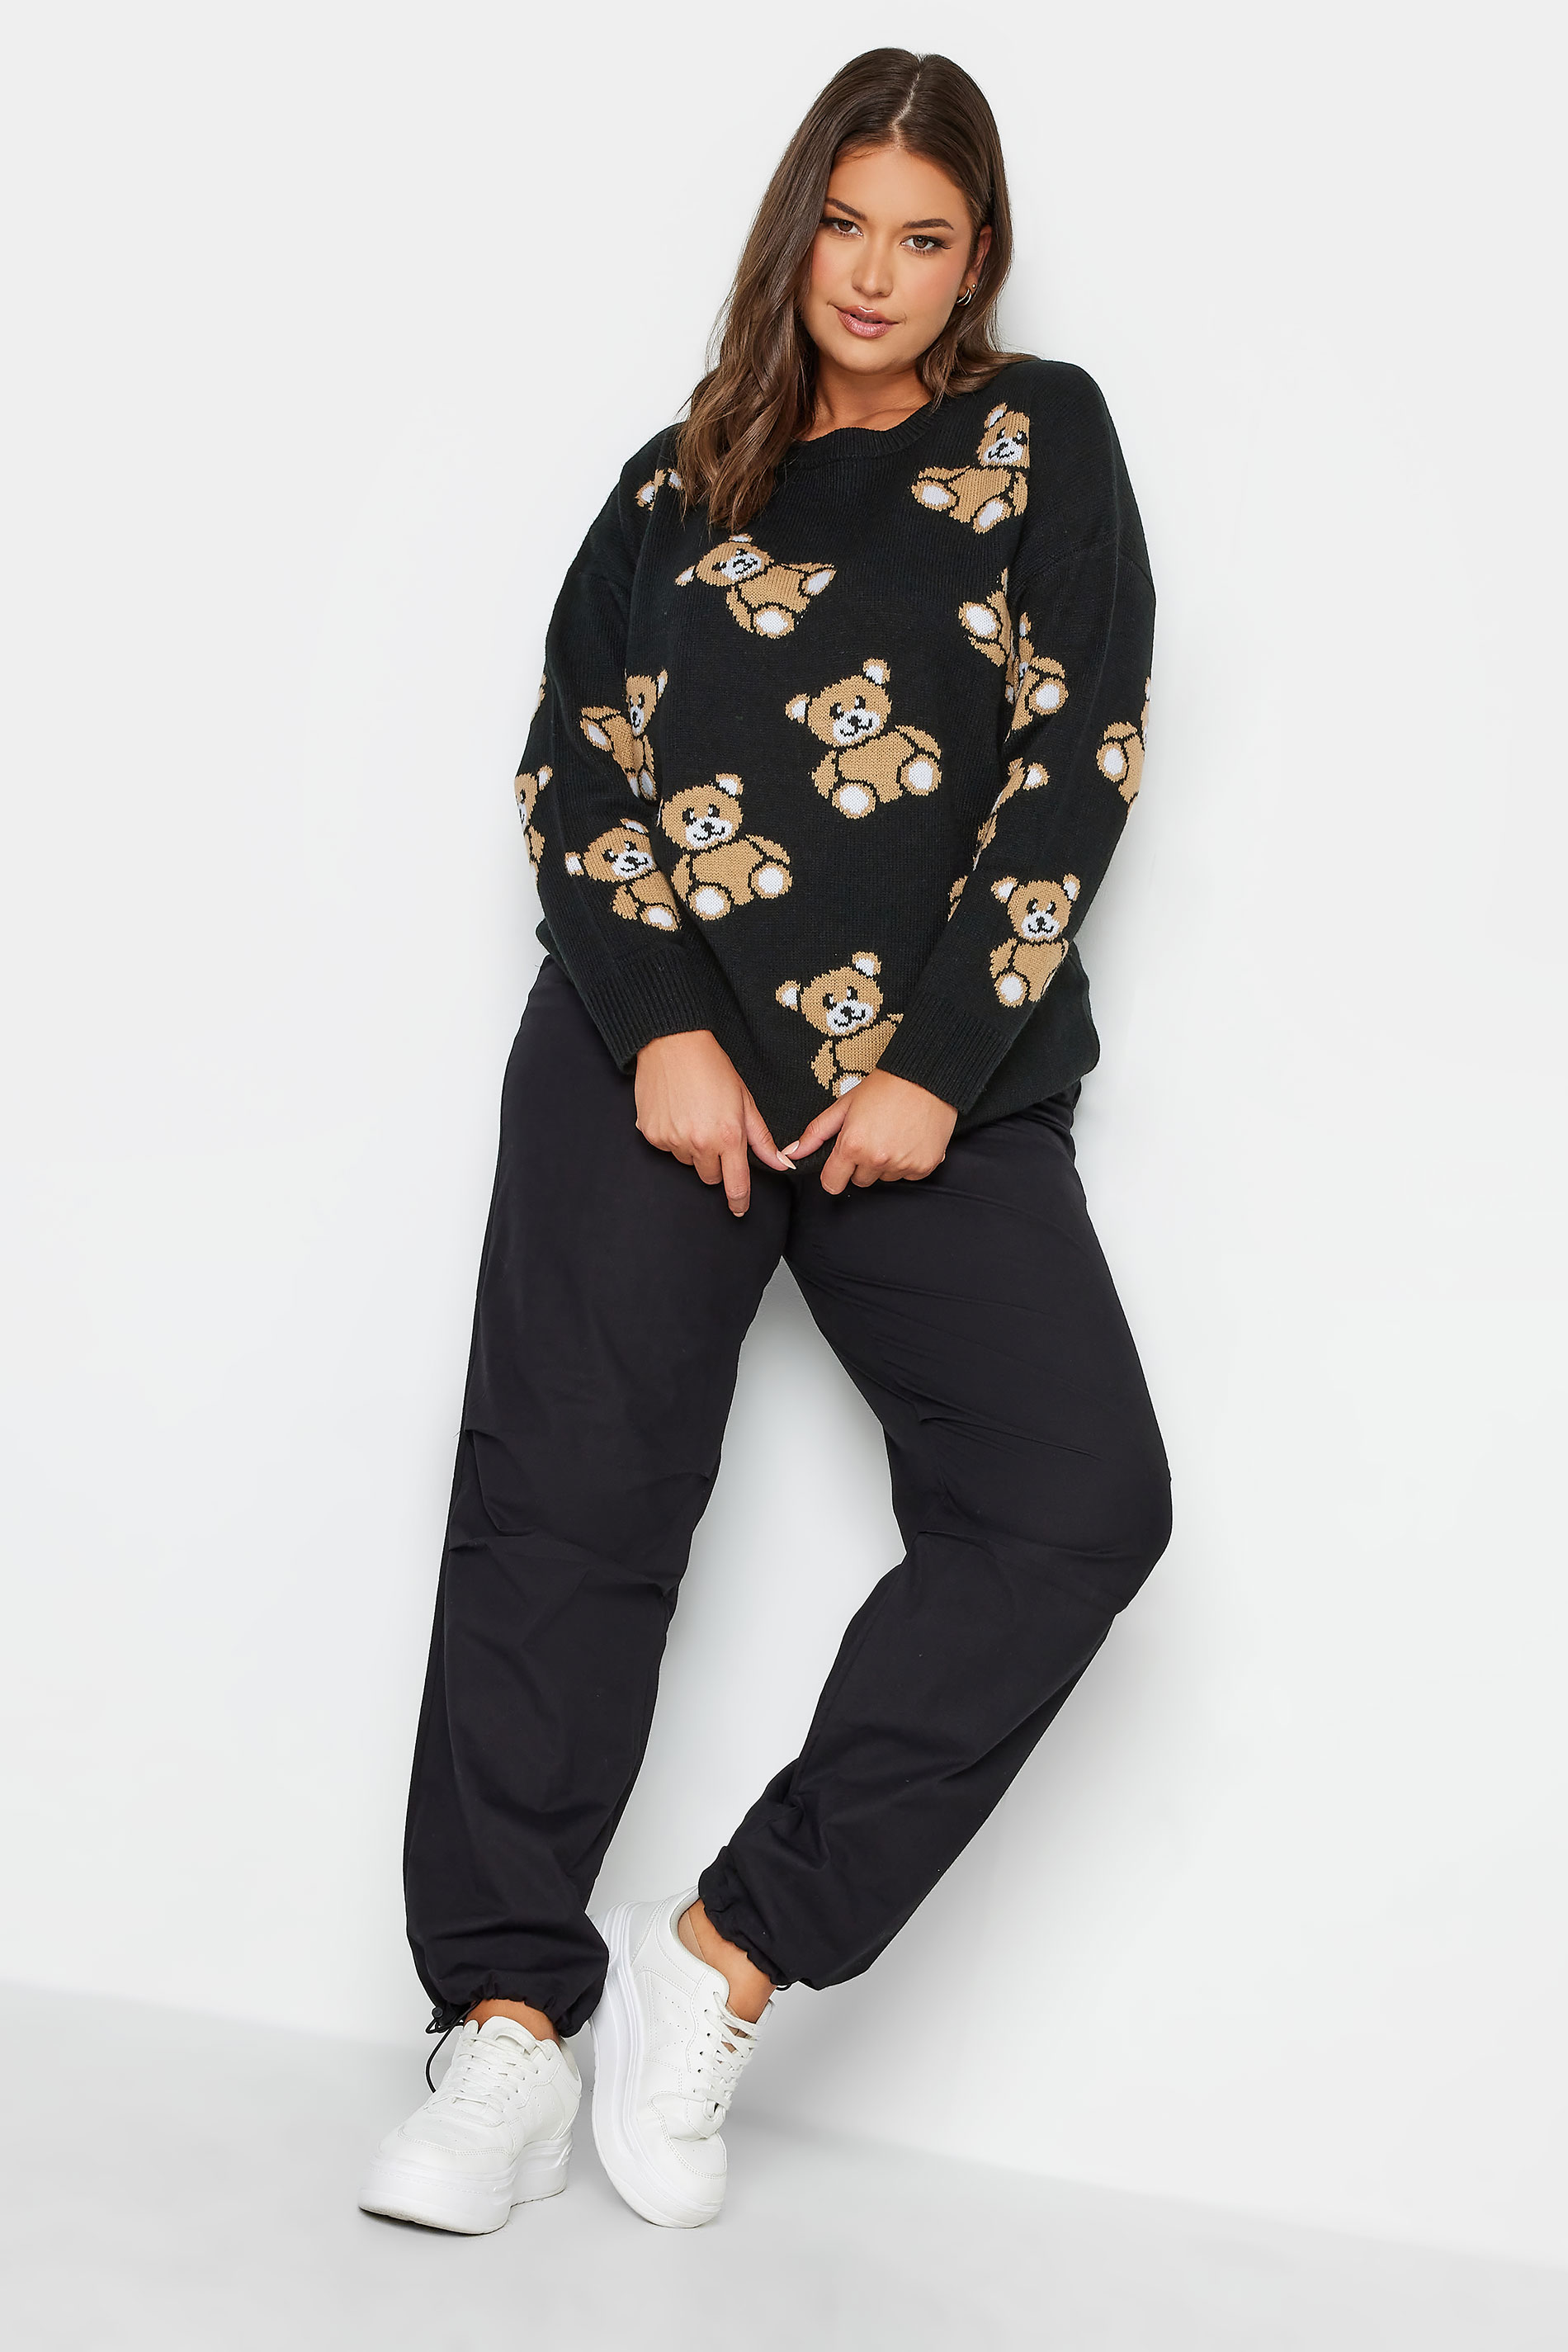 YOURS Plus Size Black Teddy Bear Print Knitted Jumper